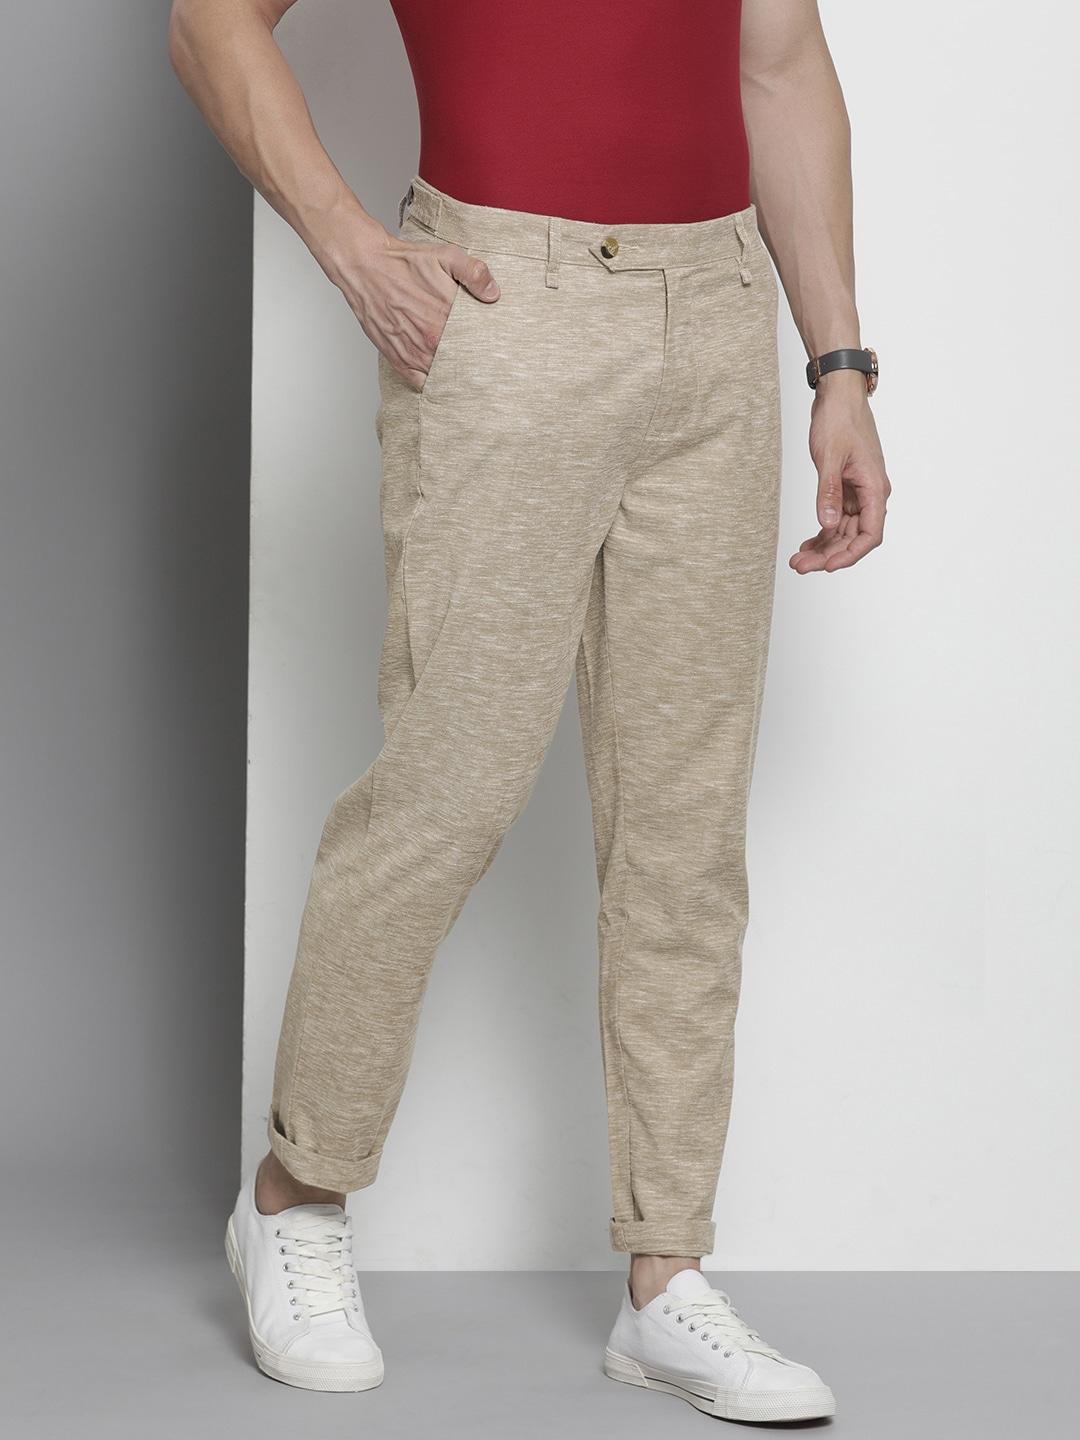 the-indian-garage-co-men-textured-slim-fit-trousers